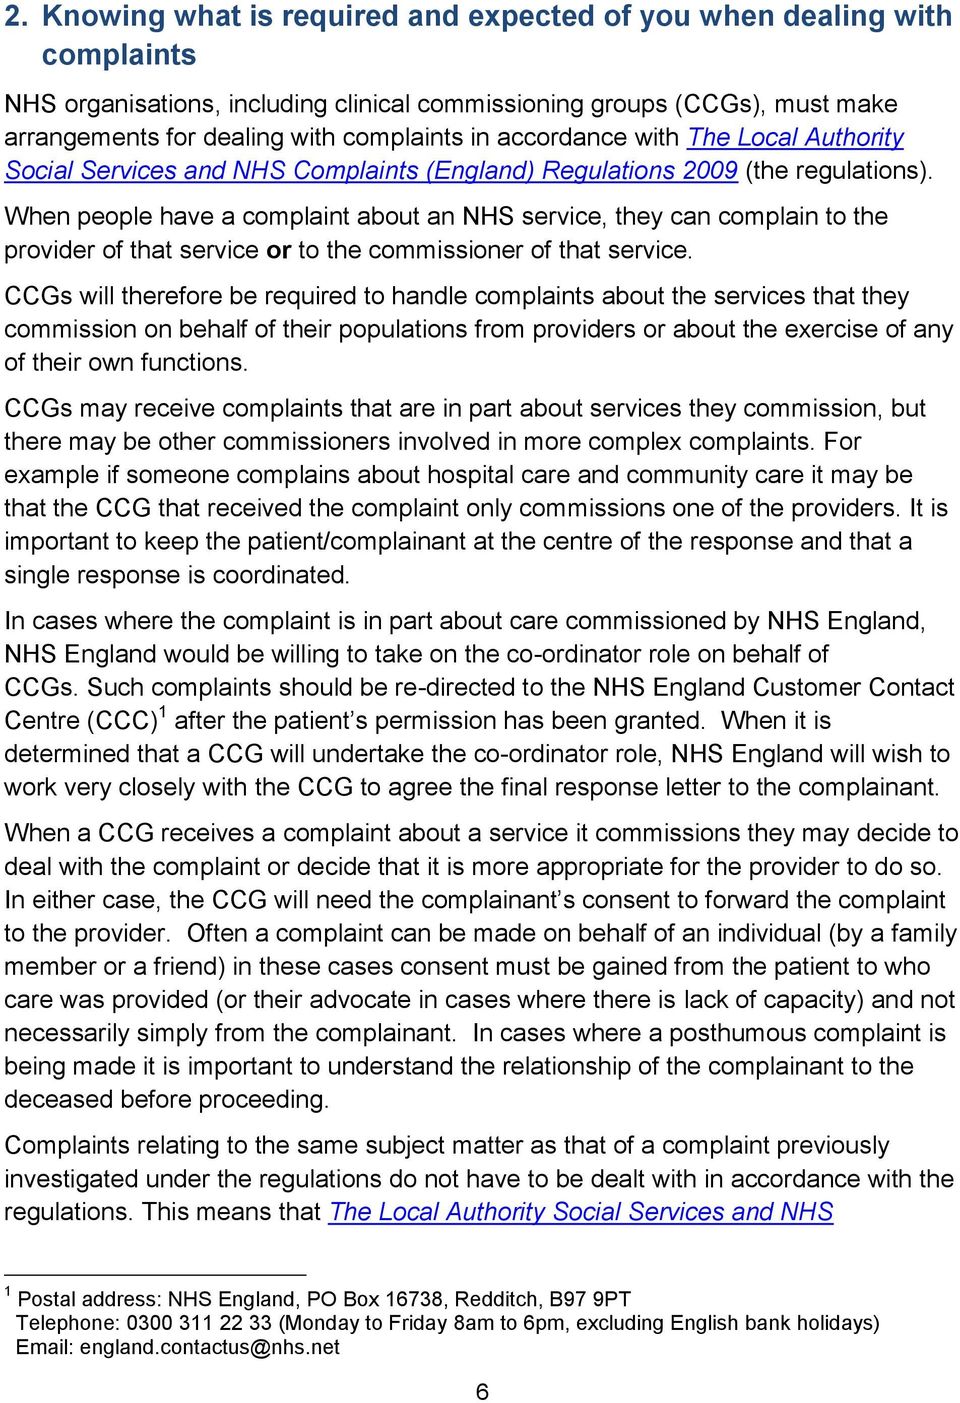 When people have a complaint about an NHS service, they can complain to the provider of that service or to the commissioner of that service.